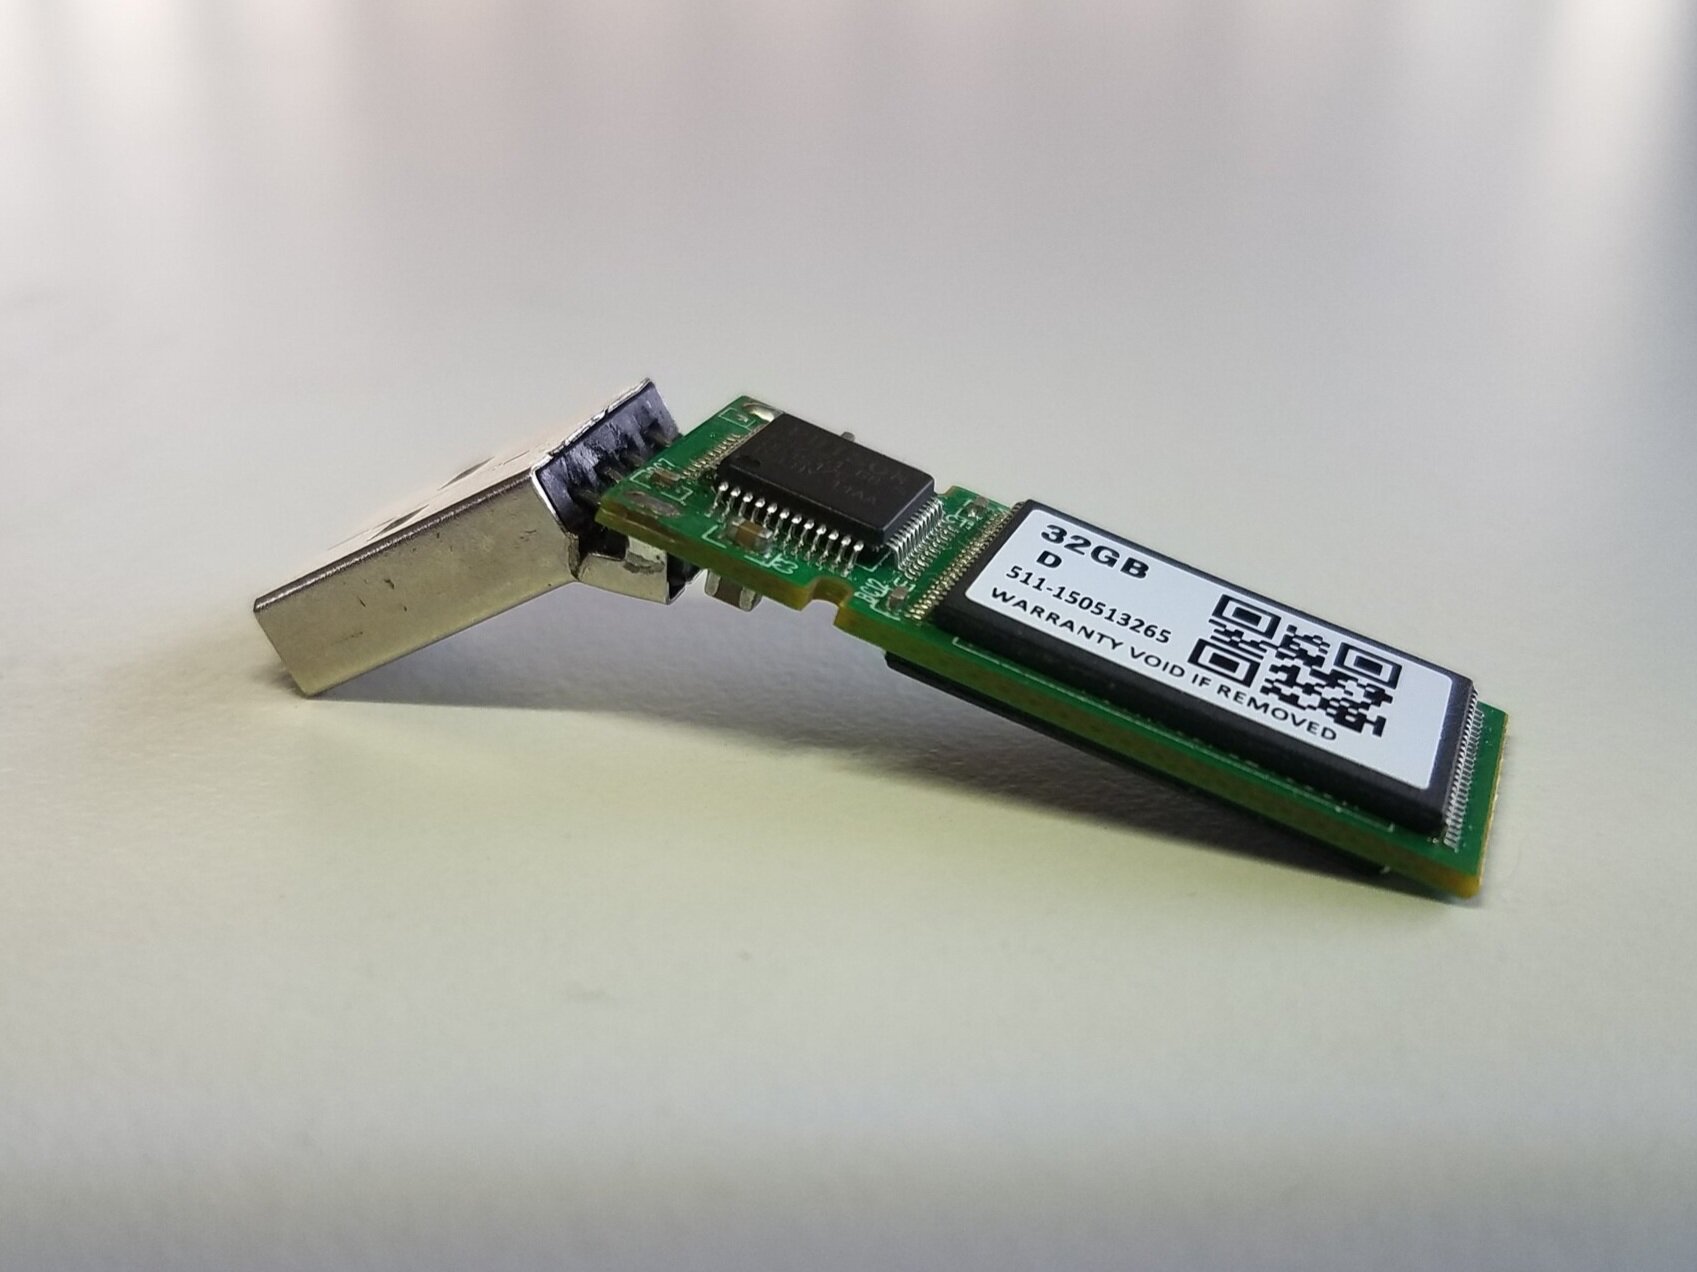 imod Præsident Forstyrre Damaged USB Drive: Data Recovery — Epoch IT: Computer Repair Allentown, IT  Services, Managed IT, Allentown PA, Lehigh Valley, Bethlehem, Easton